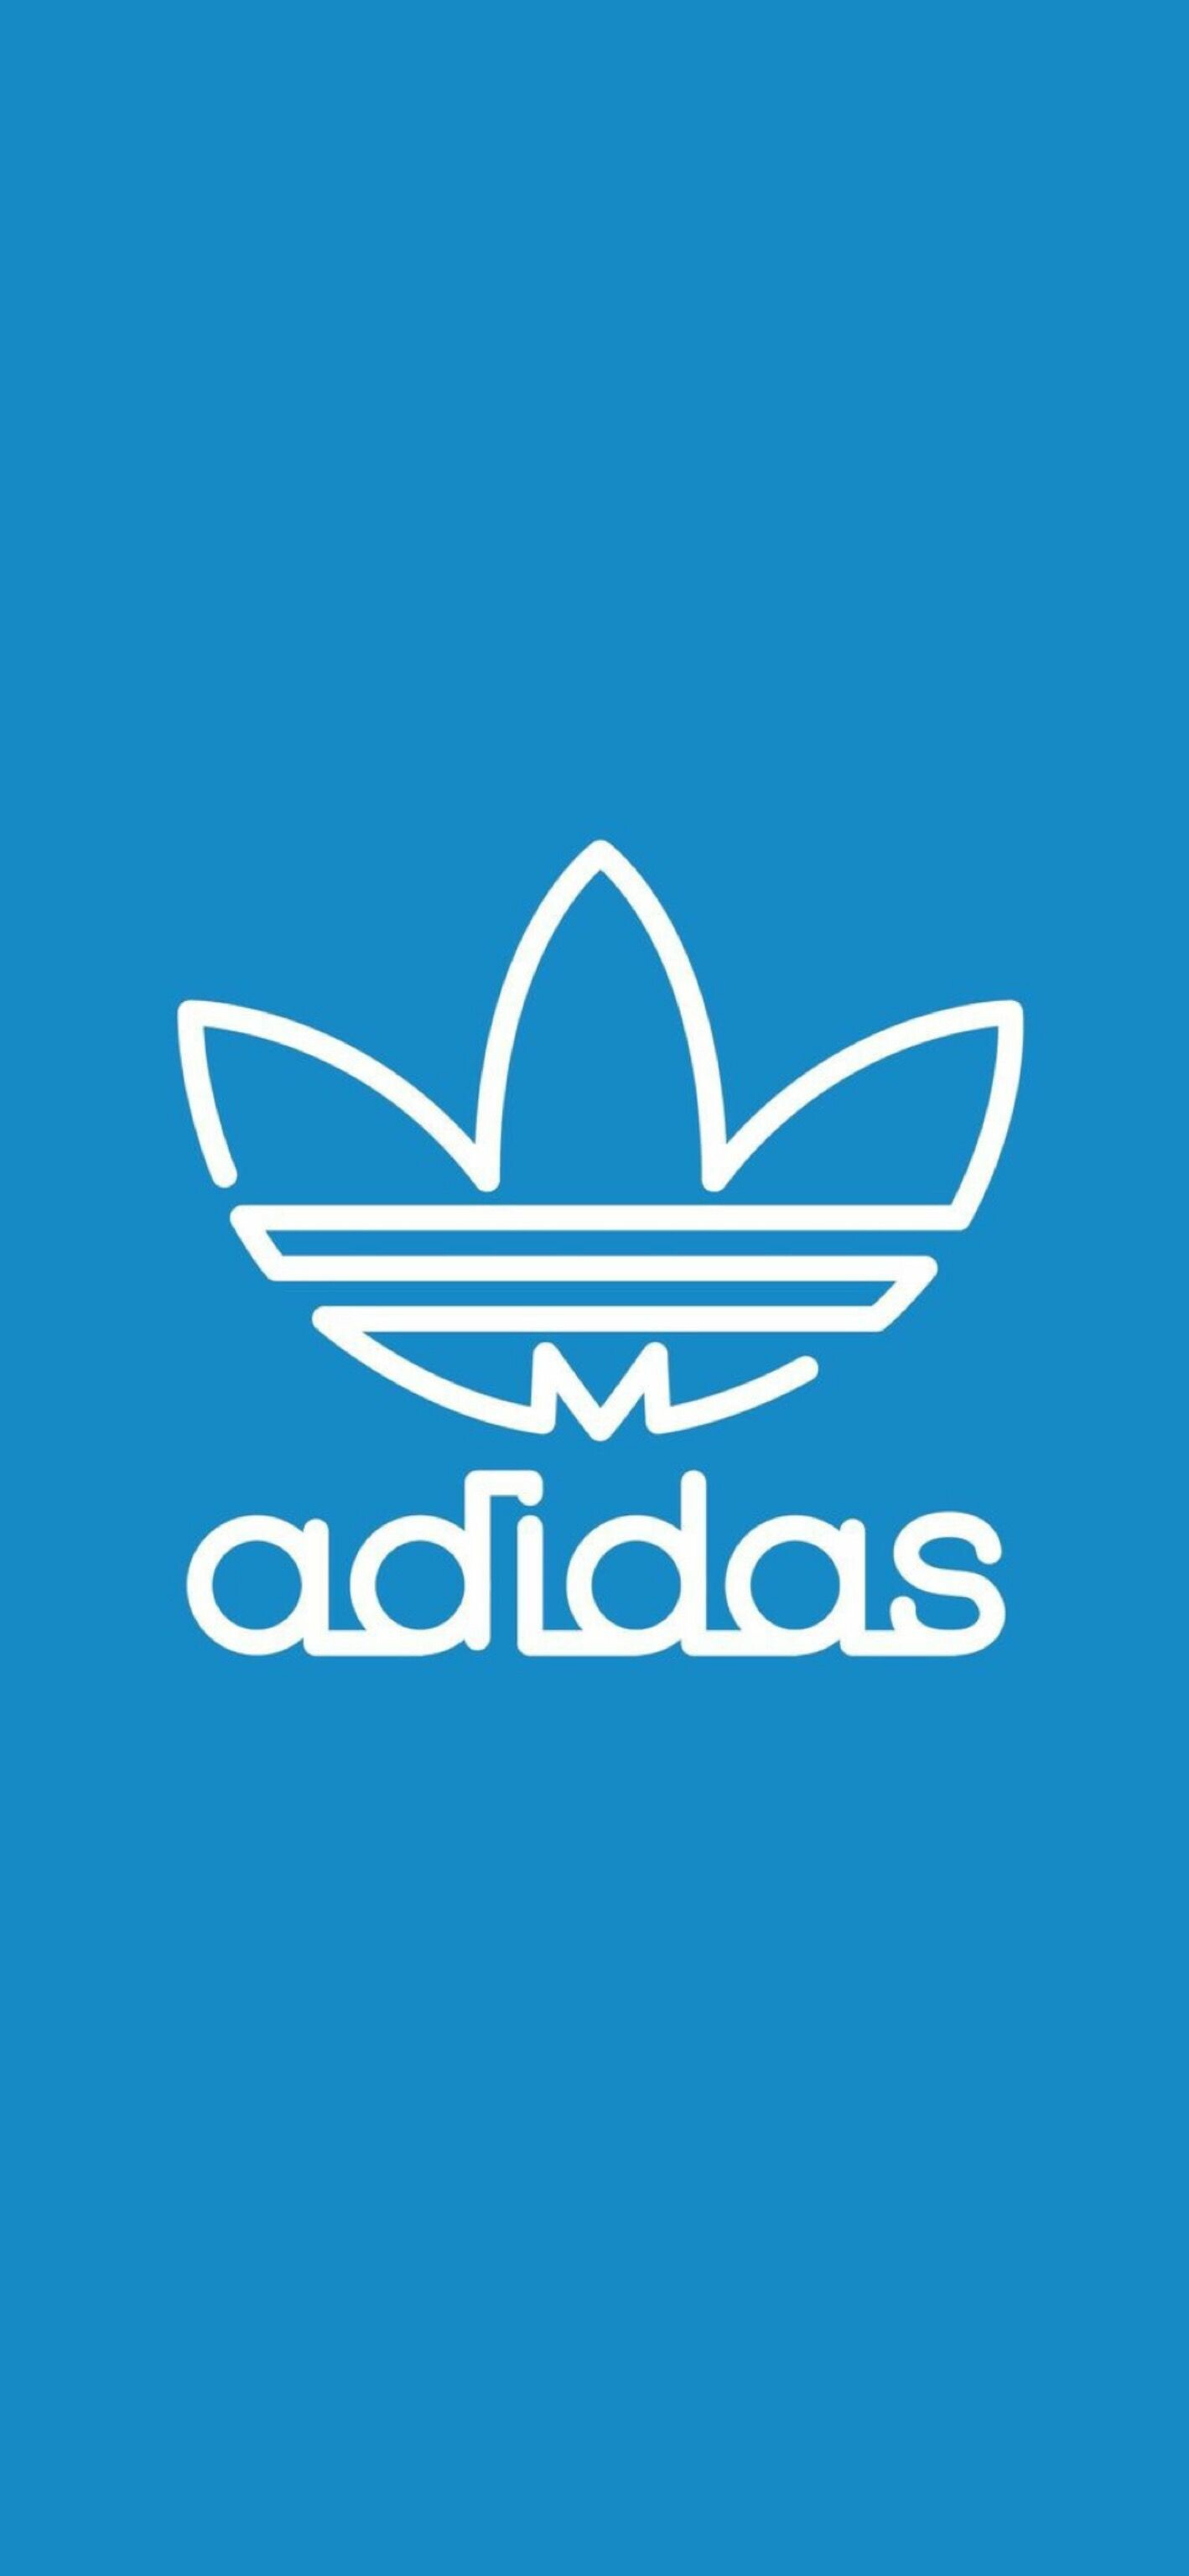 Adidas wallpapers collection, Adidas backgrounds for Nike fans, Stylish and appealing, Fashion-forward graphics, 1420x3080 HD Phone